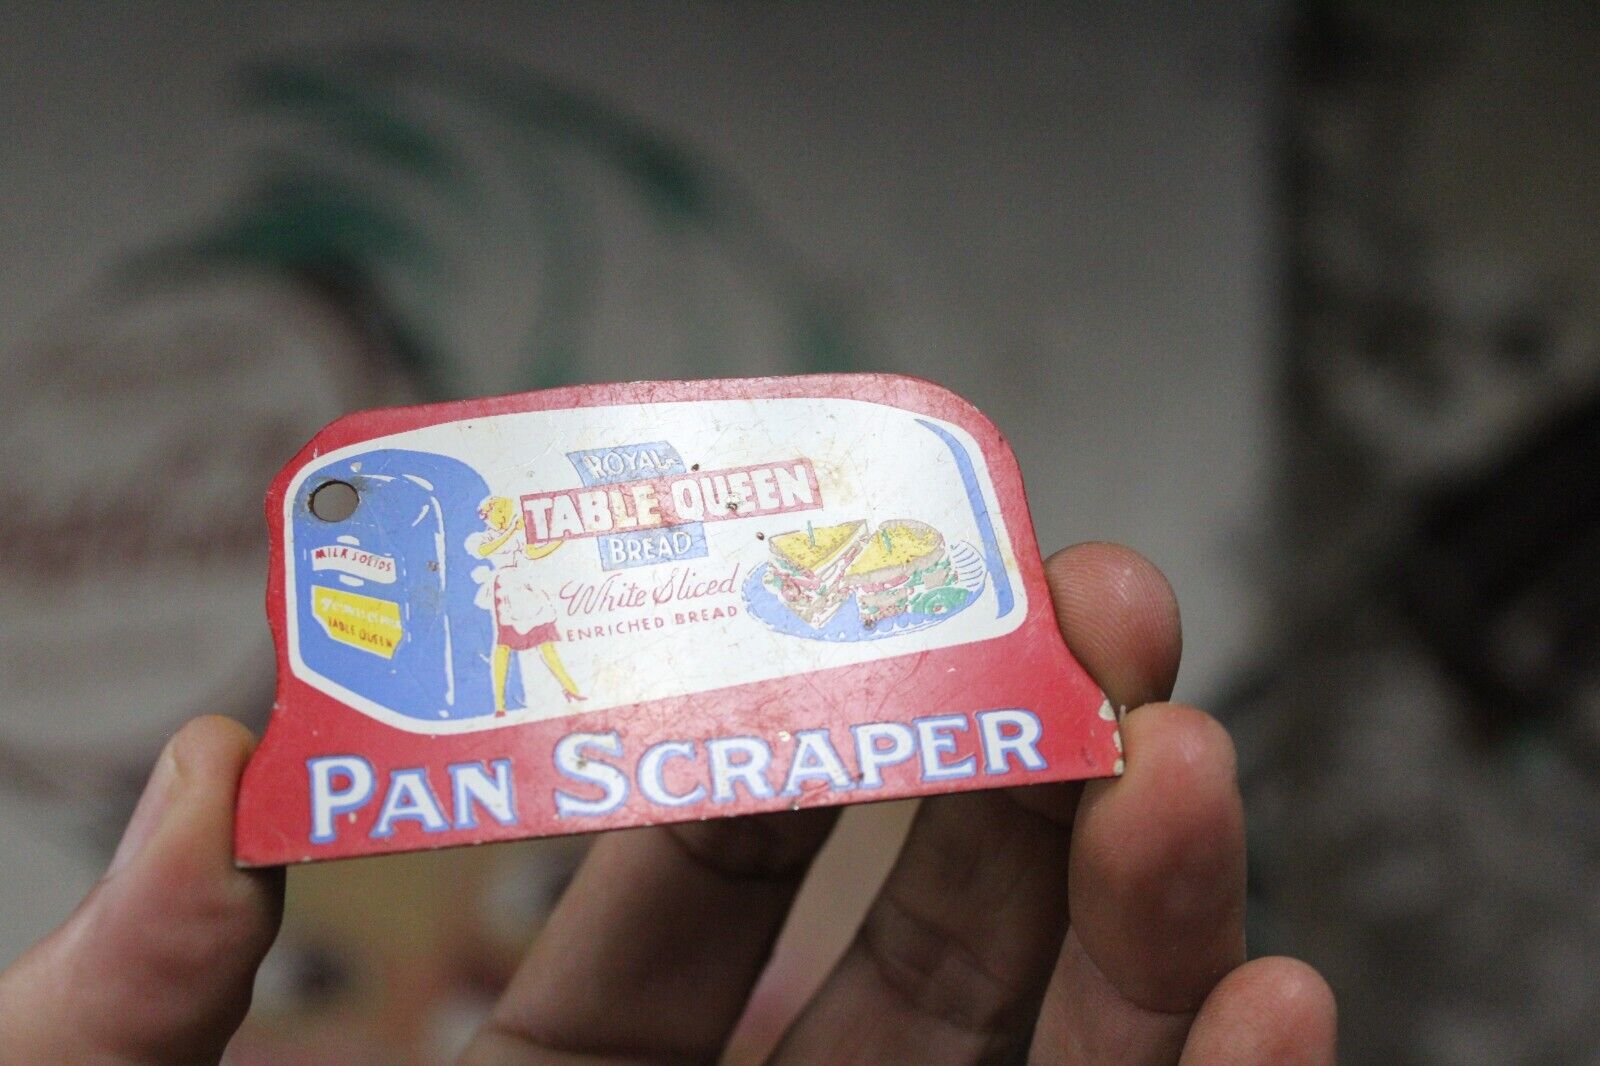 1940s TABLE QUEEN LOAF BREAD TIN LITHO POT SCRAPER PROMO SIGN GENERAL STORE GIFT